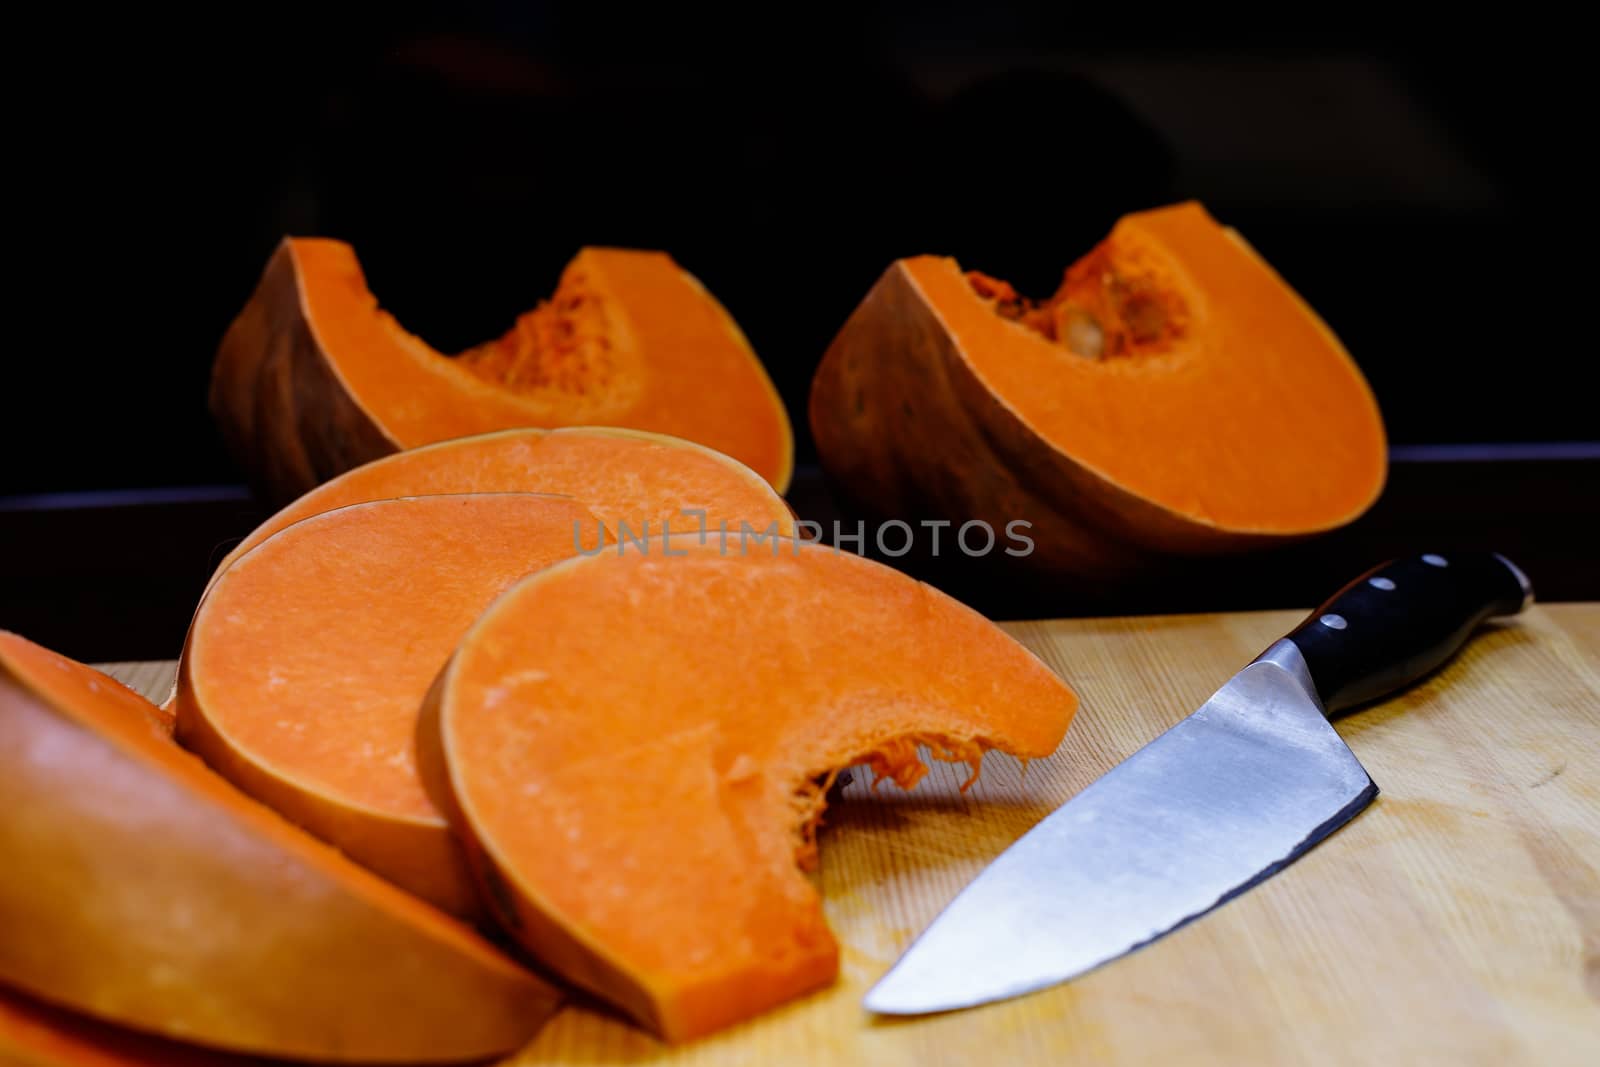 The food on thanksgiving. A bright orange pumpkin is cut into pieces with a kitchen knife and lies on a wooden Board.